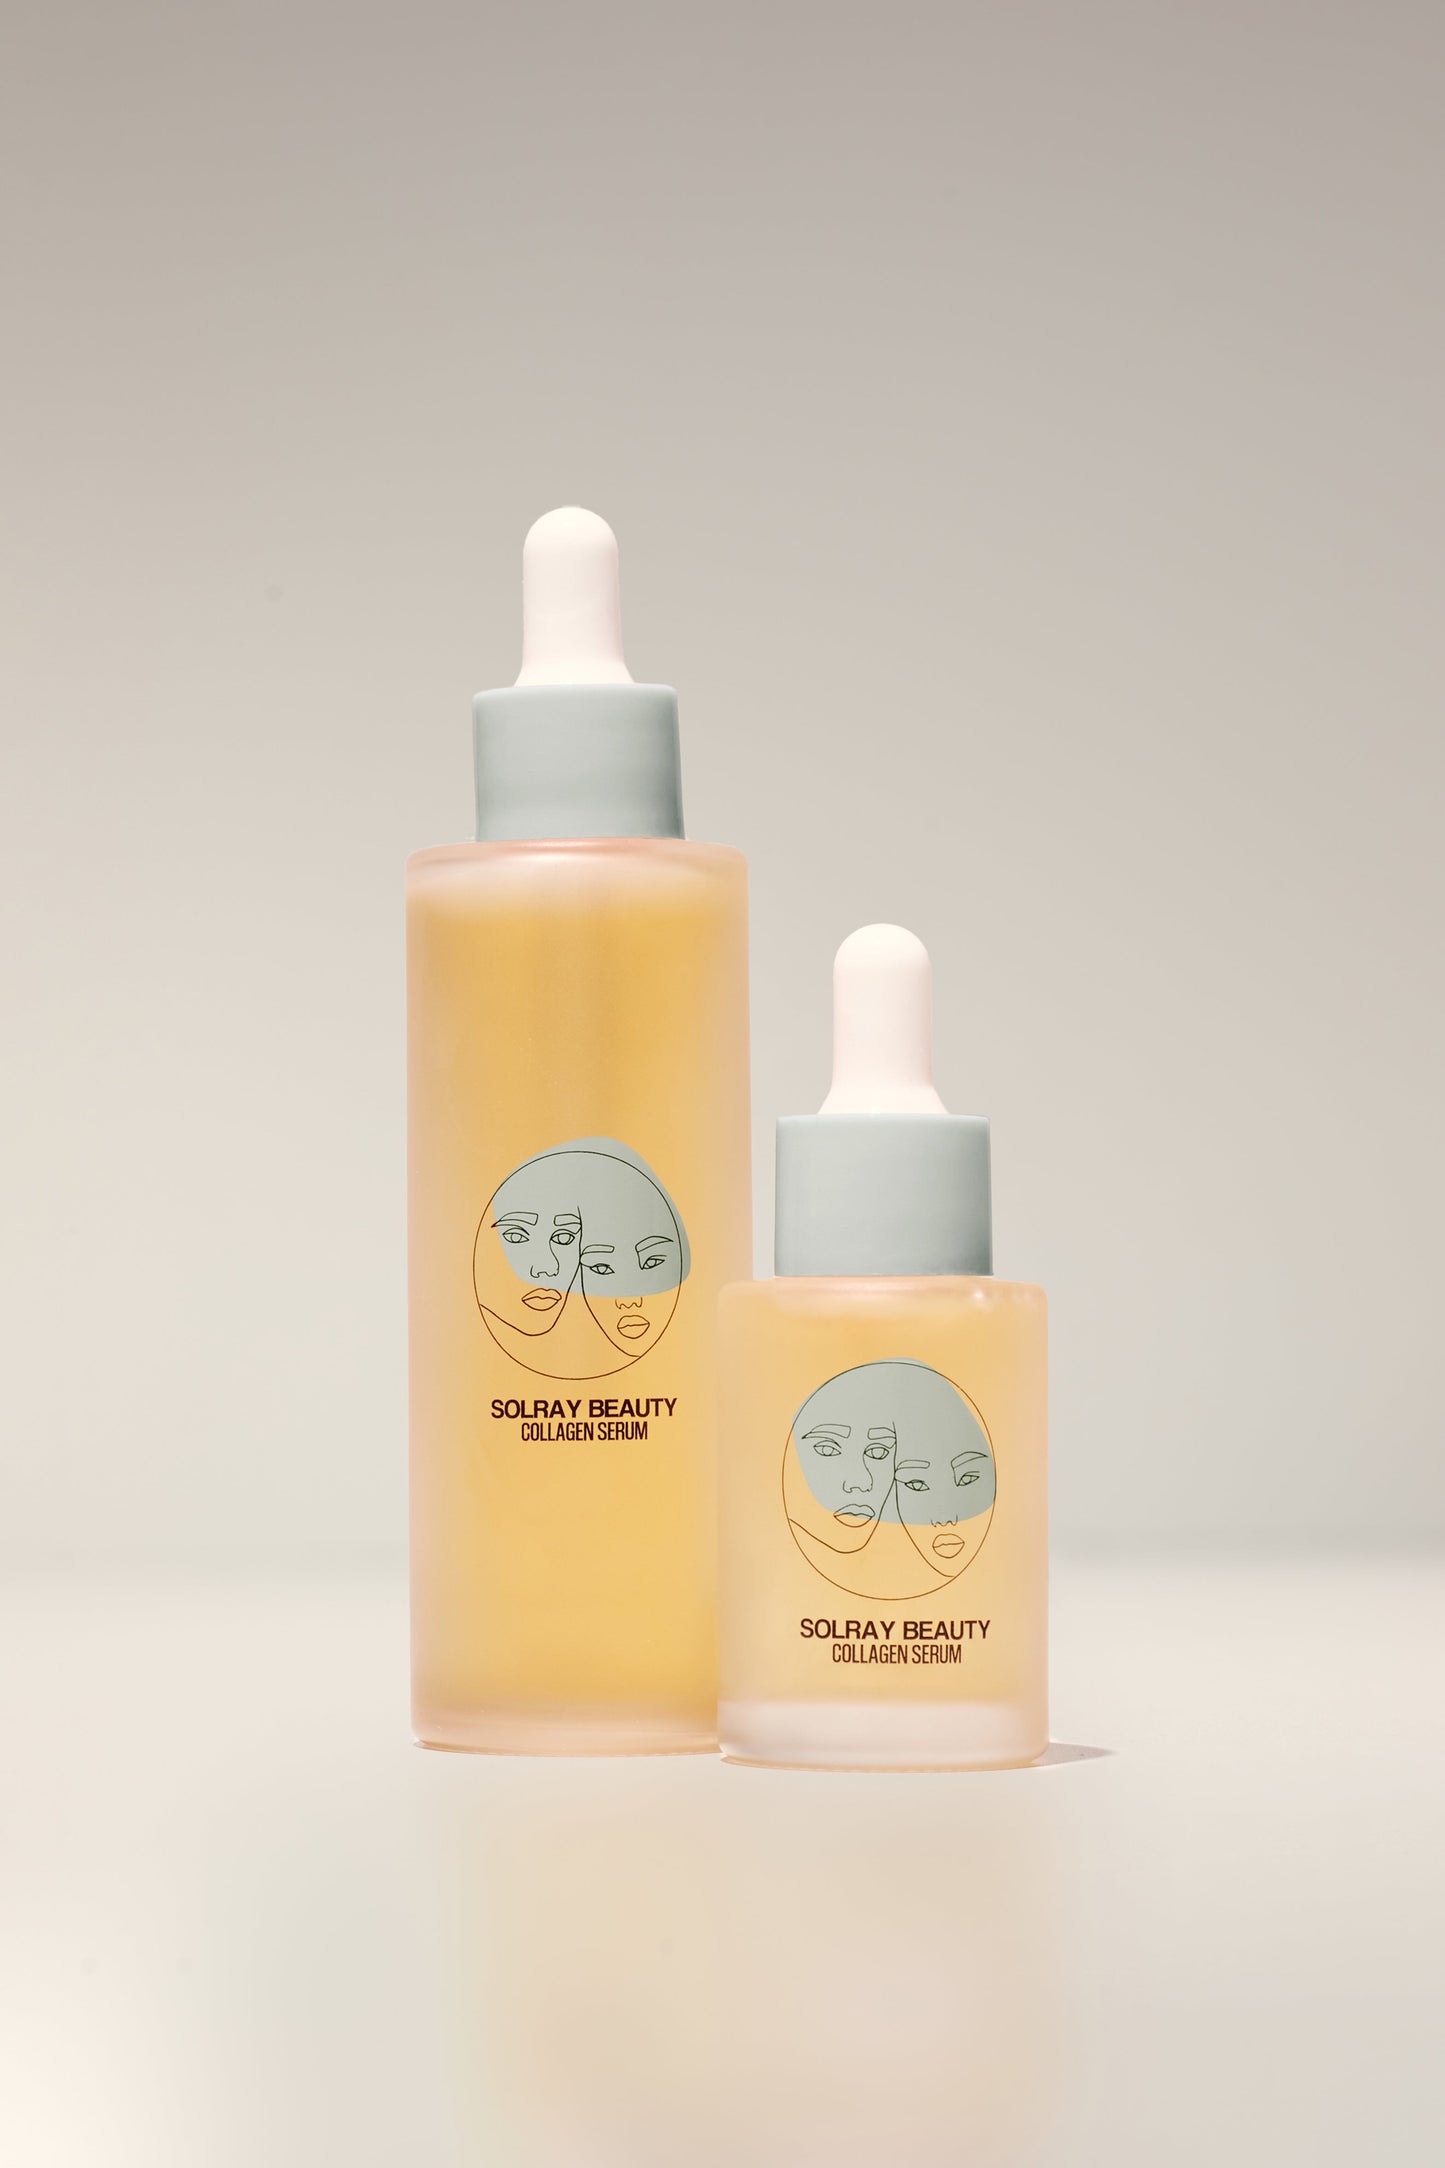 The Collagen Serum from SolRay Beauty in 30ml and 80ml bottles side by side, showing the size options available.